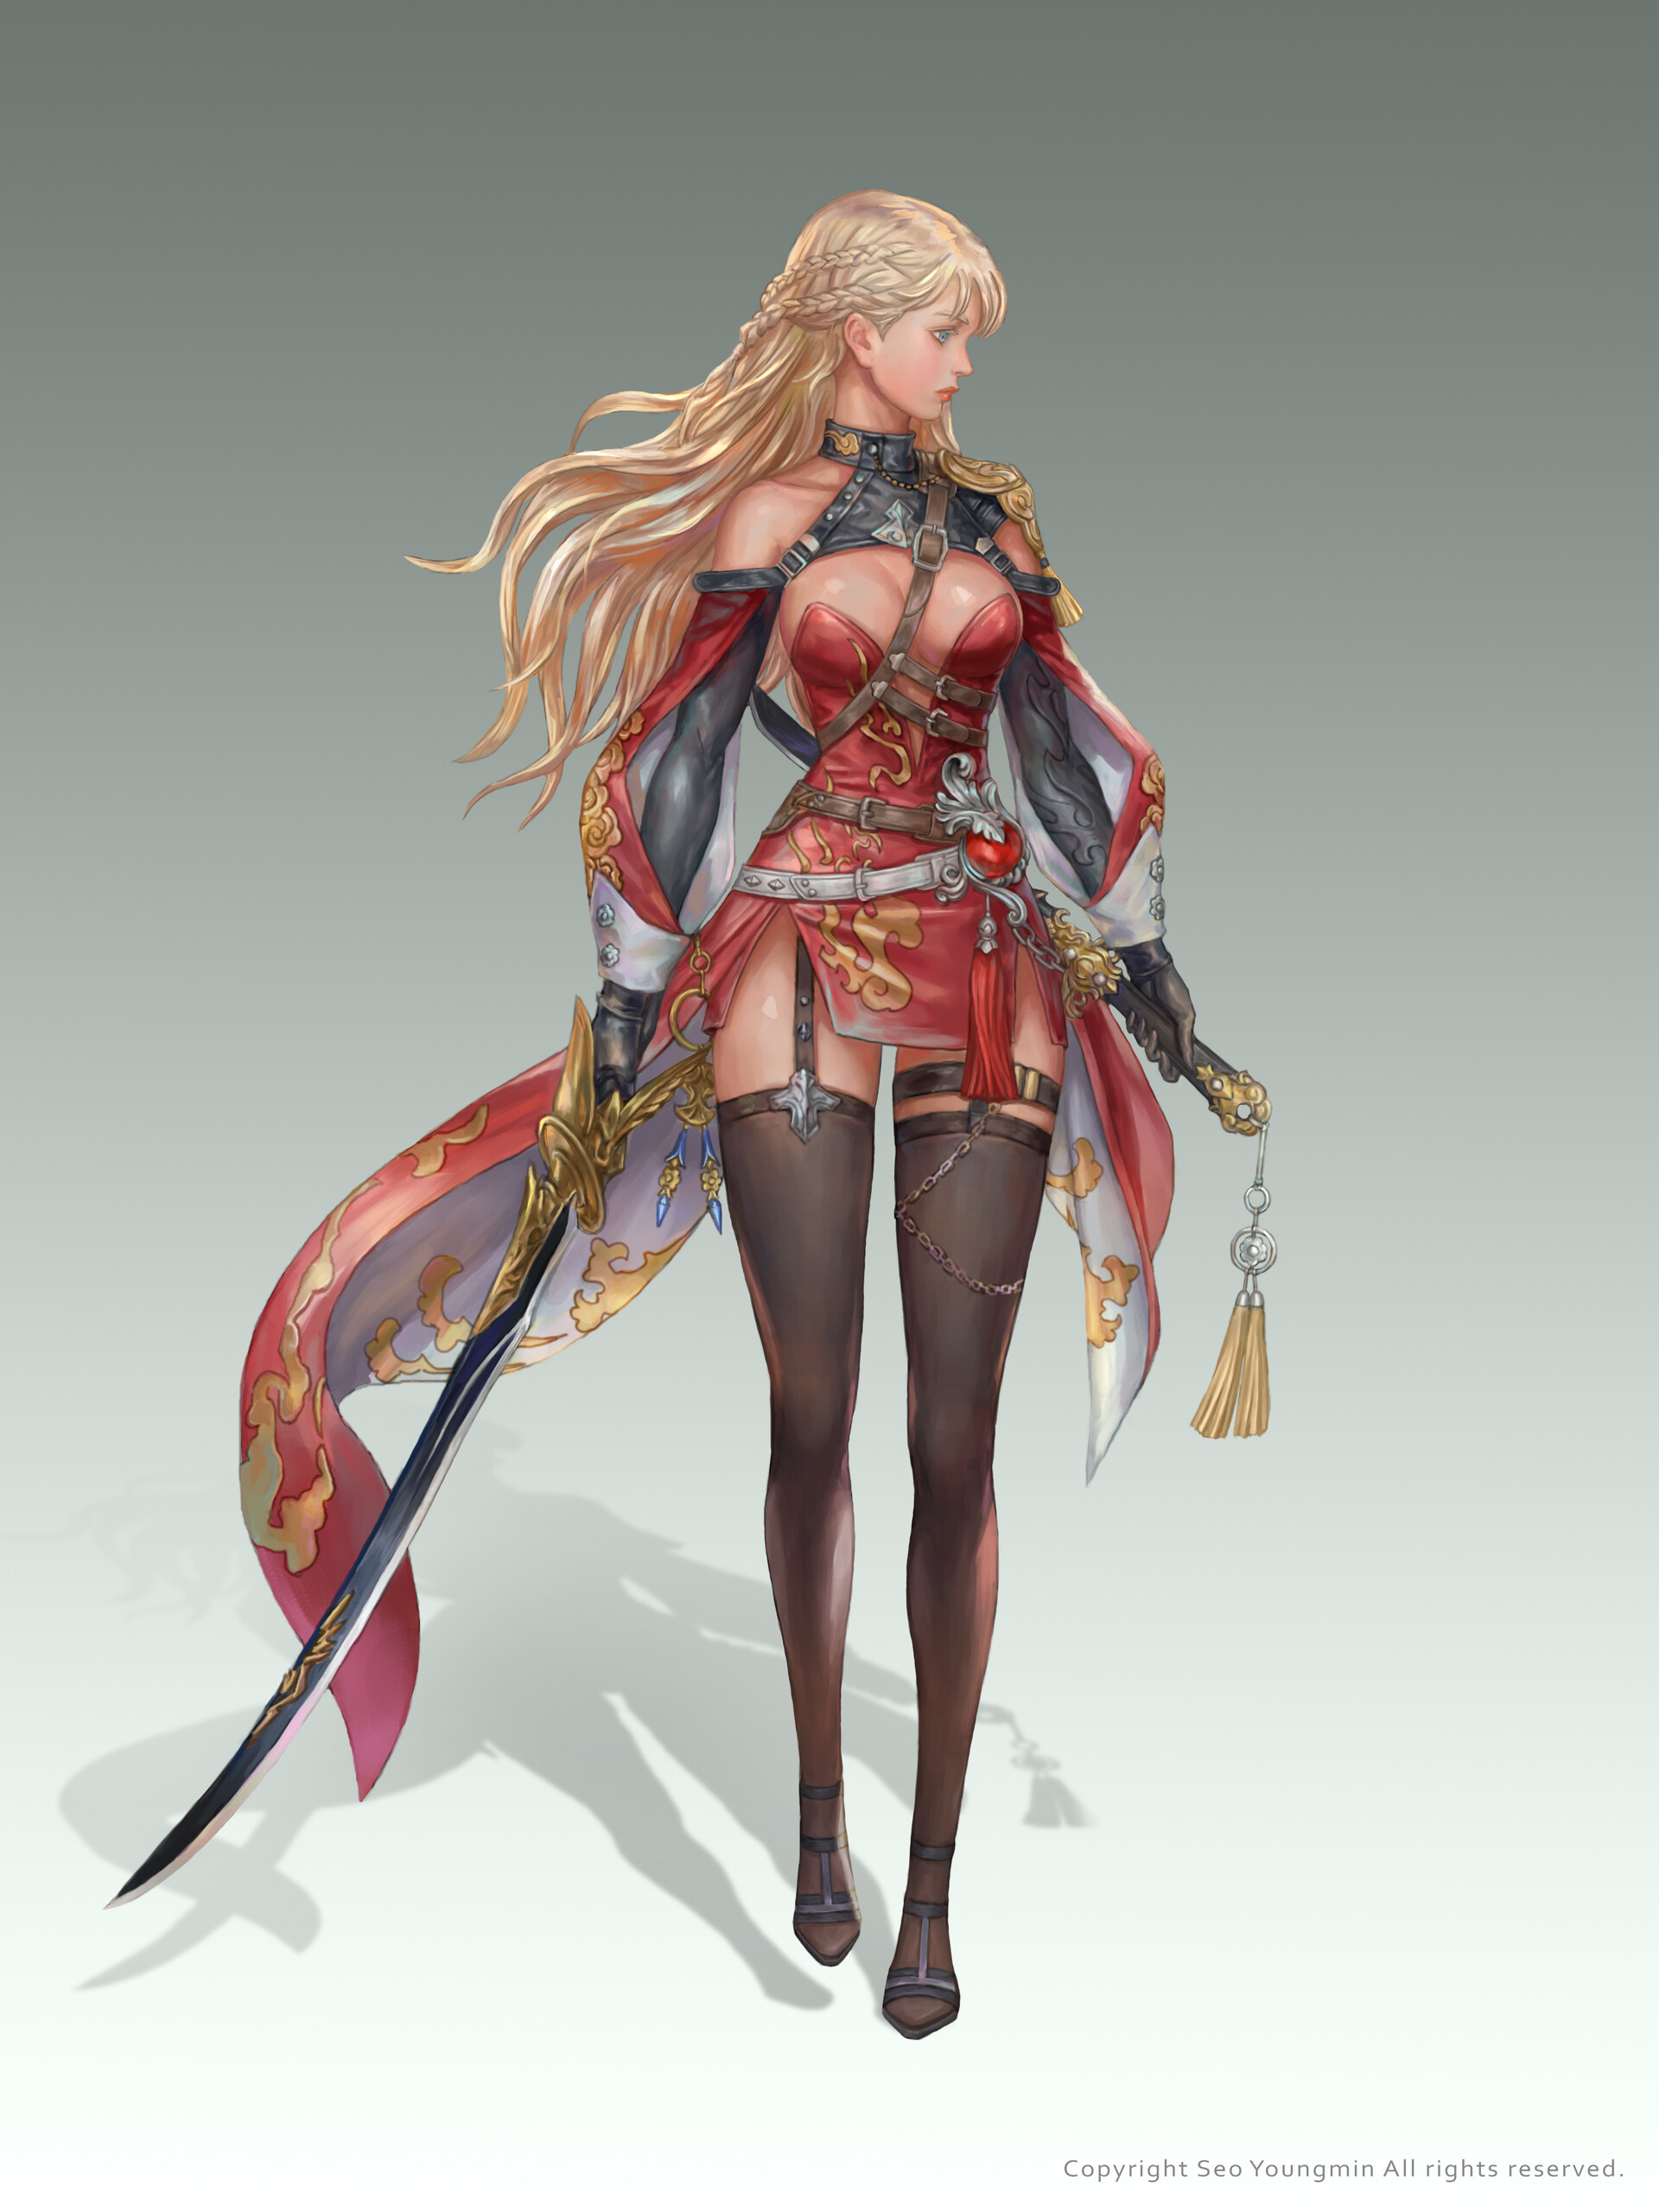 General 1920x2560 Youngmin Seo drawing women warrior sword red clothing